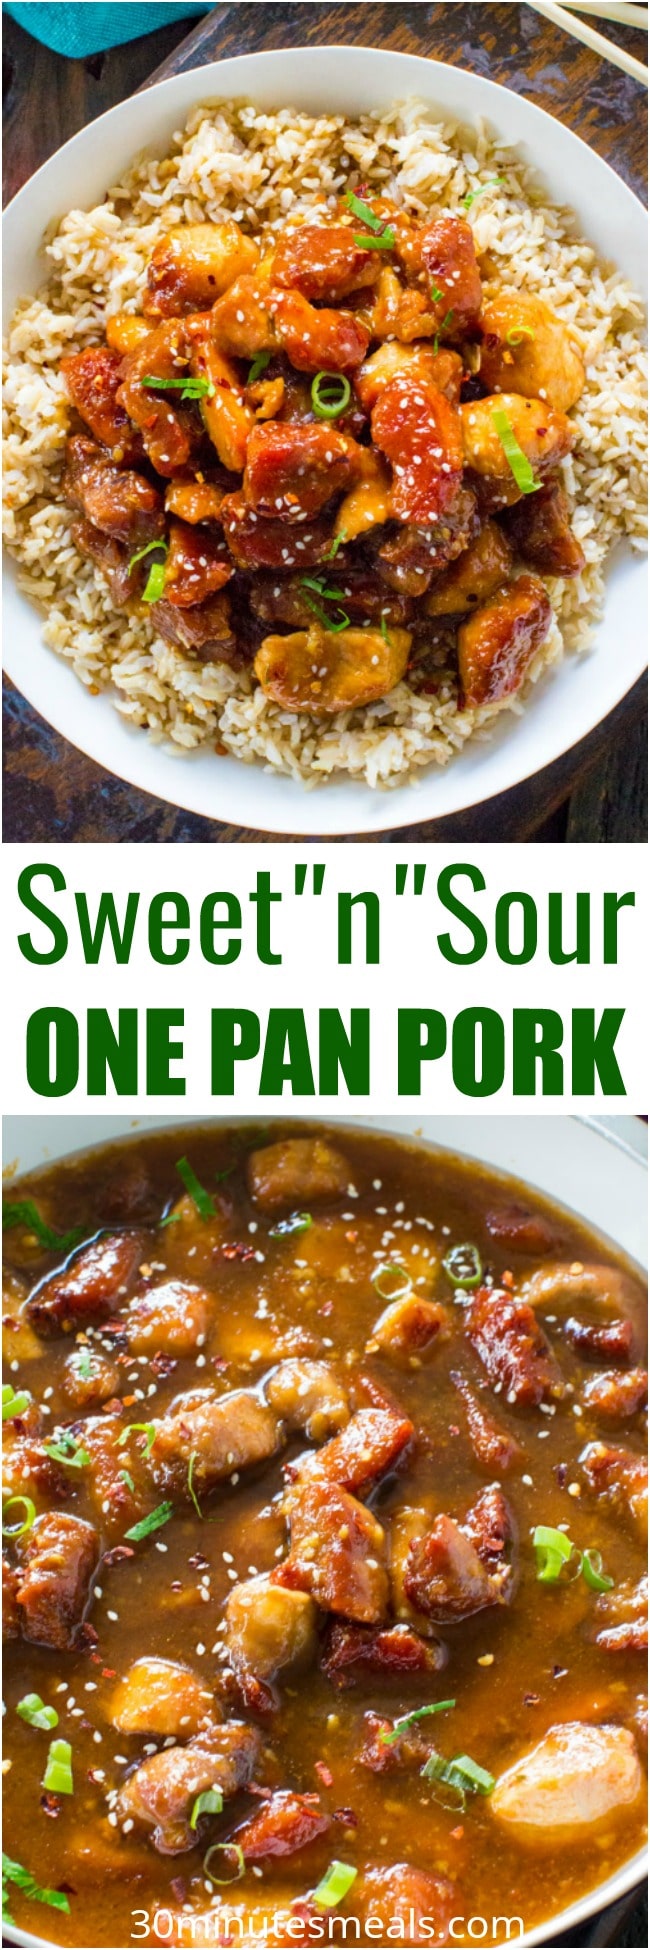 Sweet and Sour Pork is a restaurant quality meal that can be easily made at home in one pan with budget friendly ingredients.